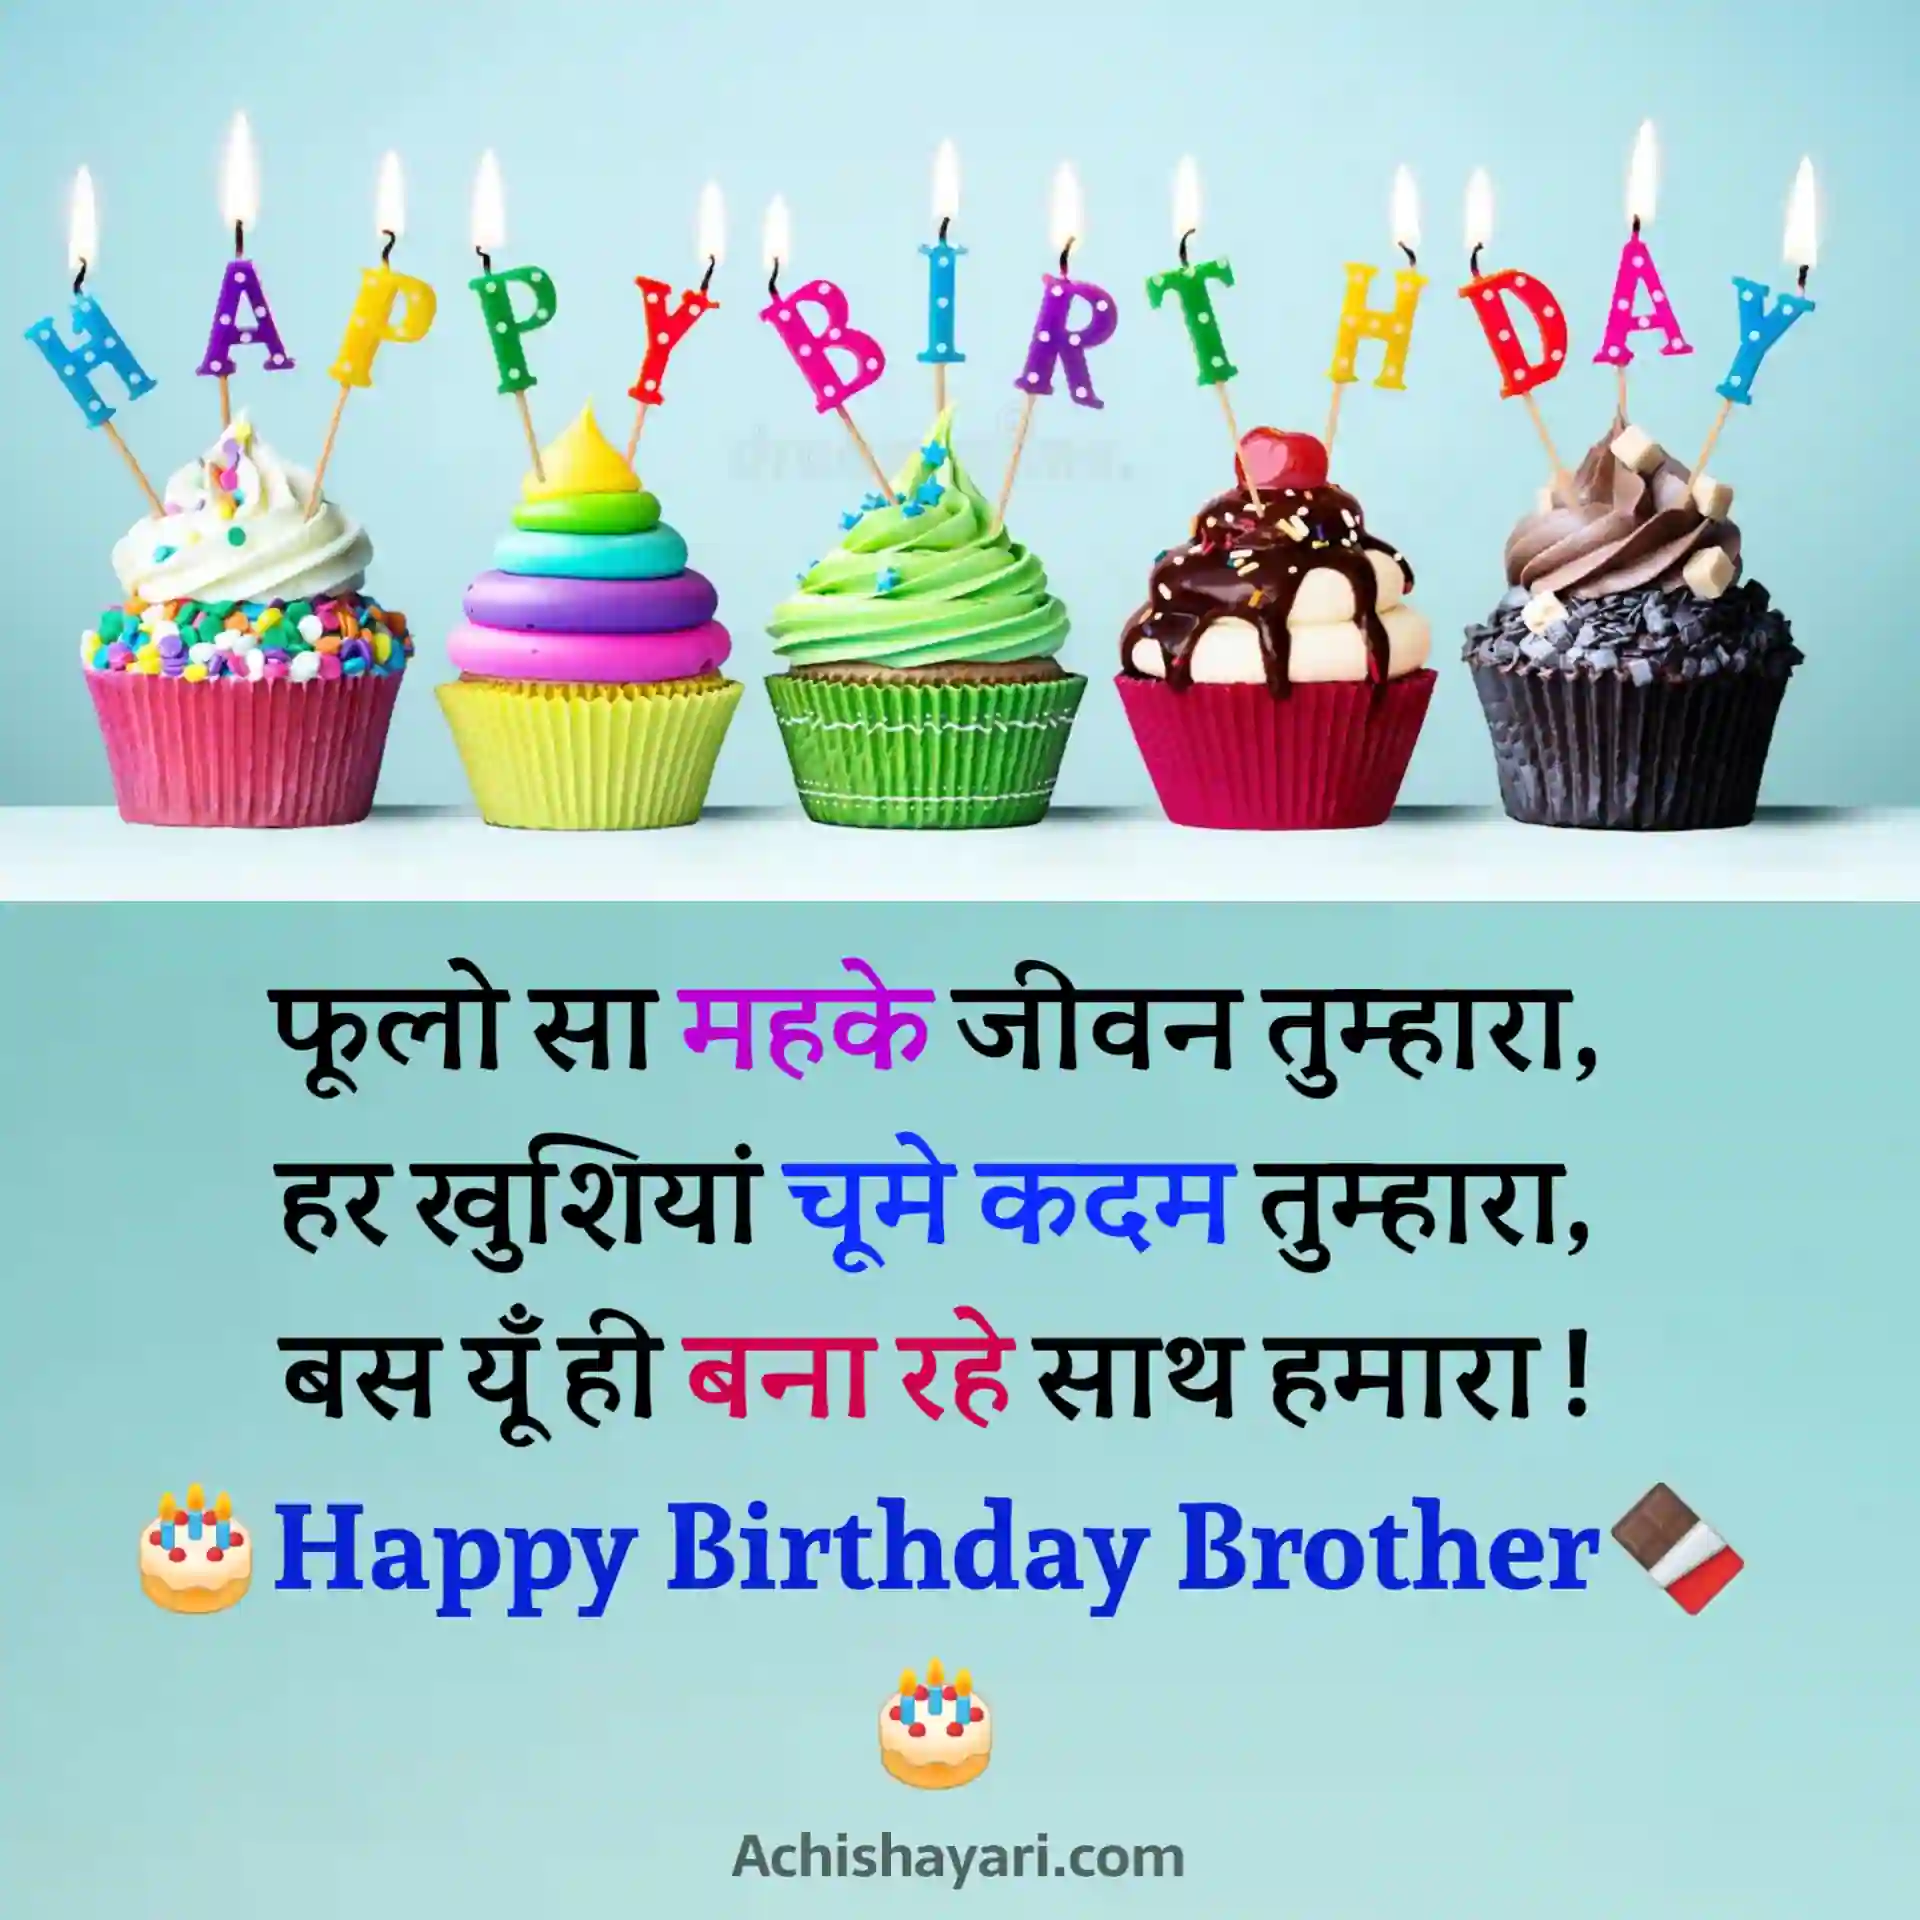 Birthday Wishes in Hindi for Brother Image